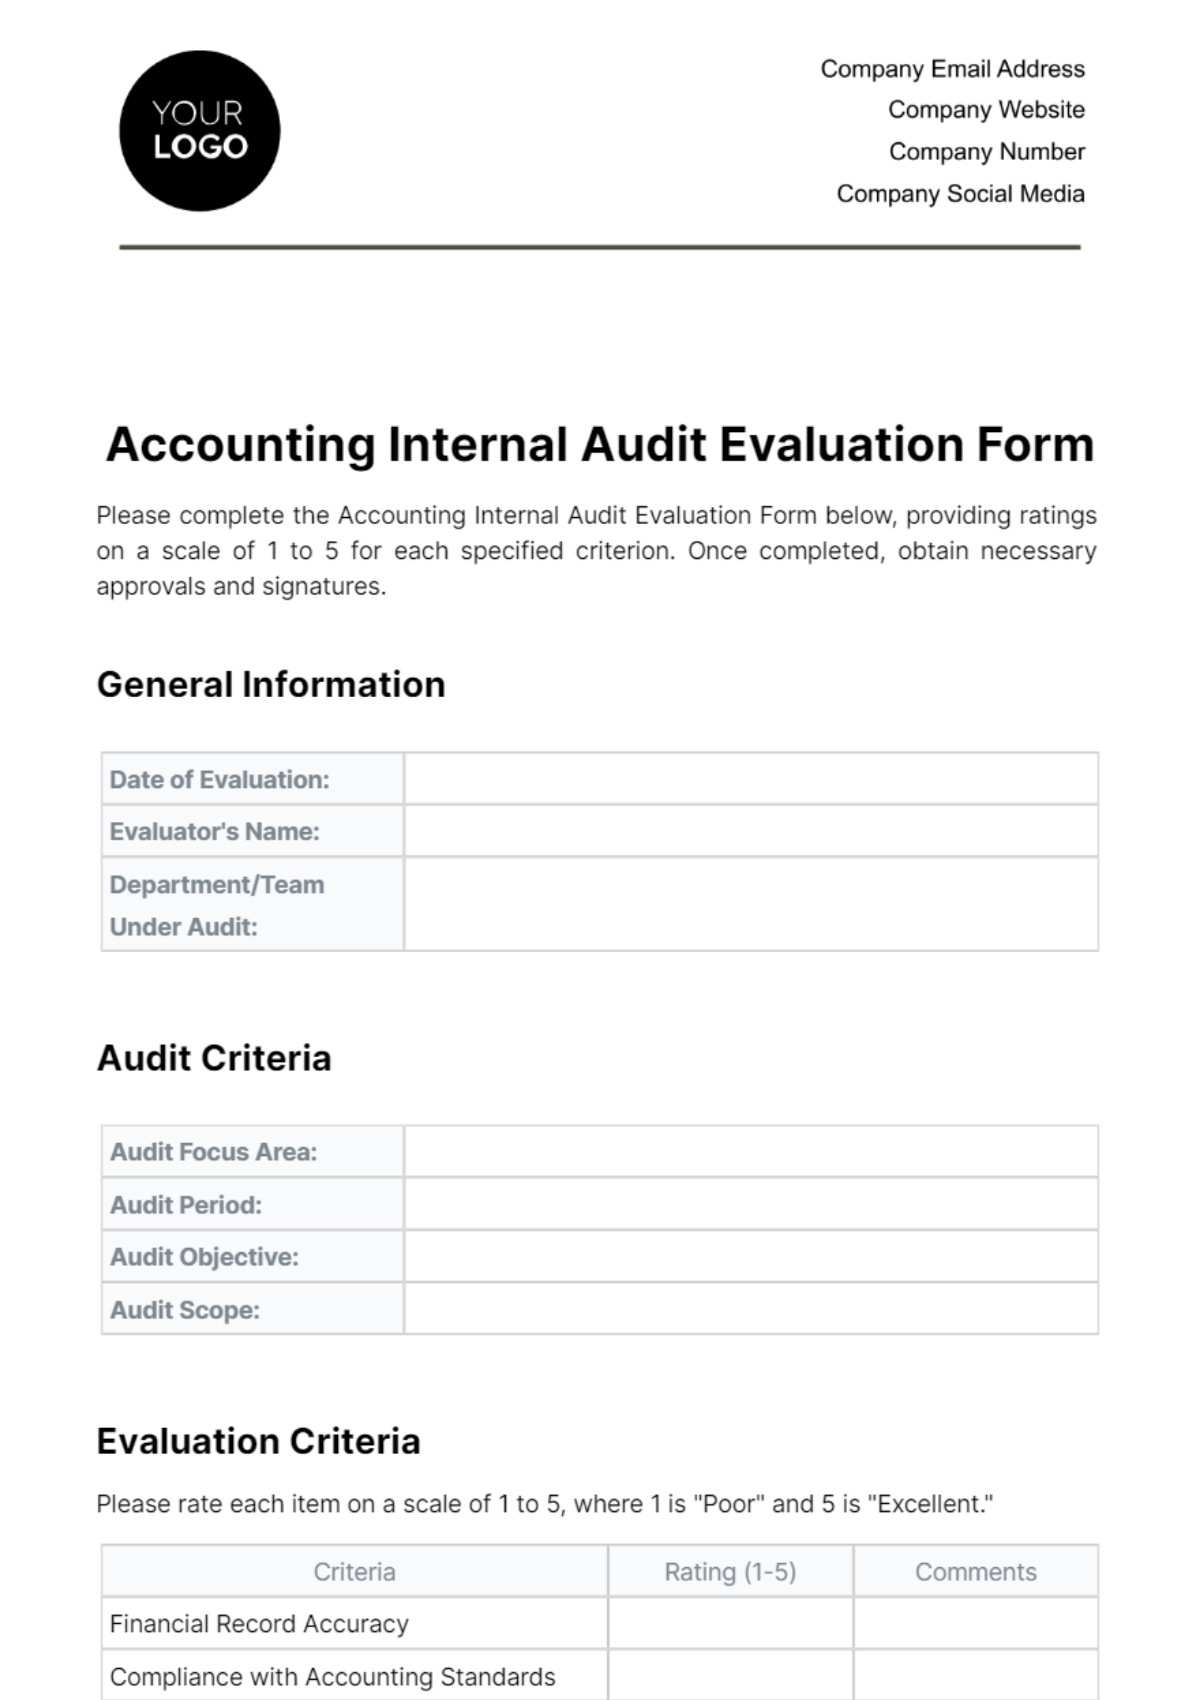 Accounting Internal Audit Evaluation Form Template